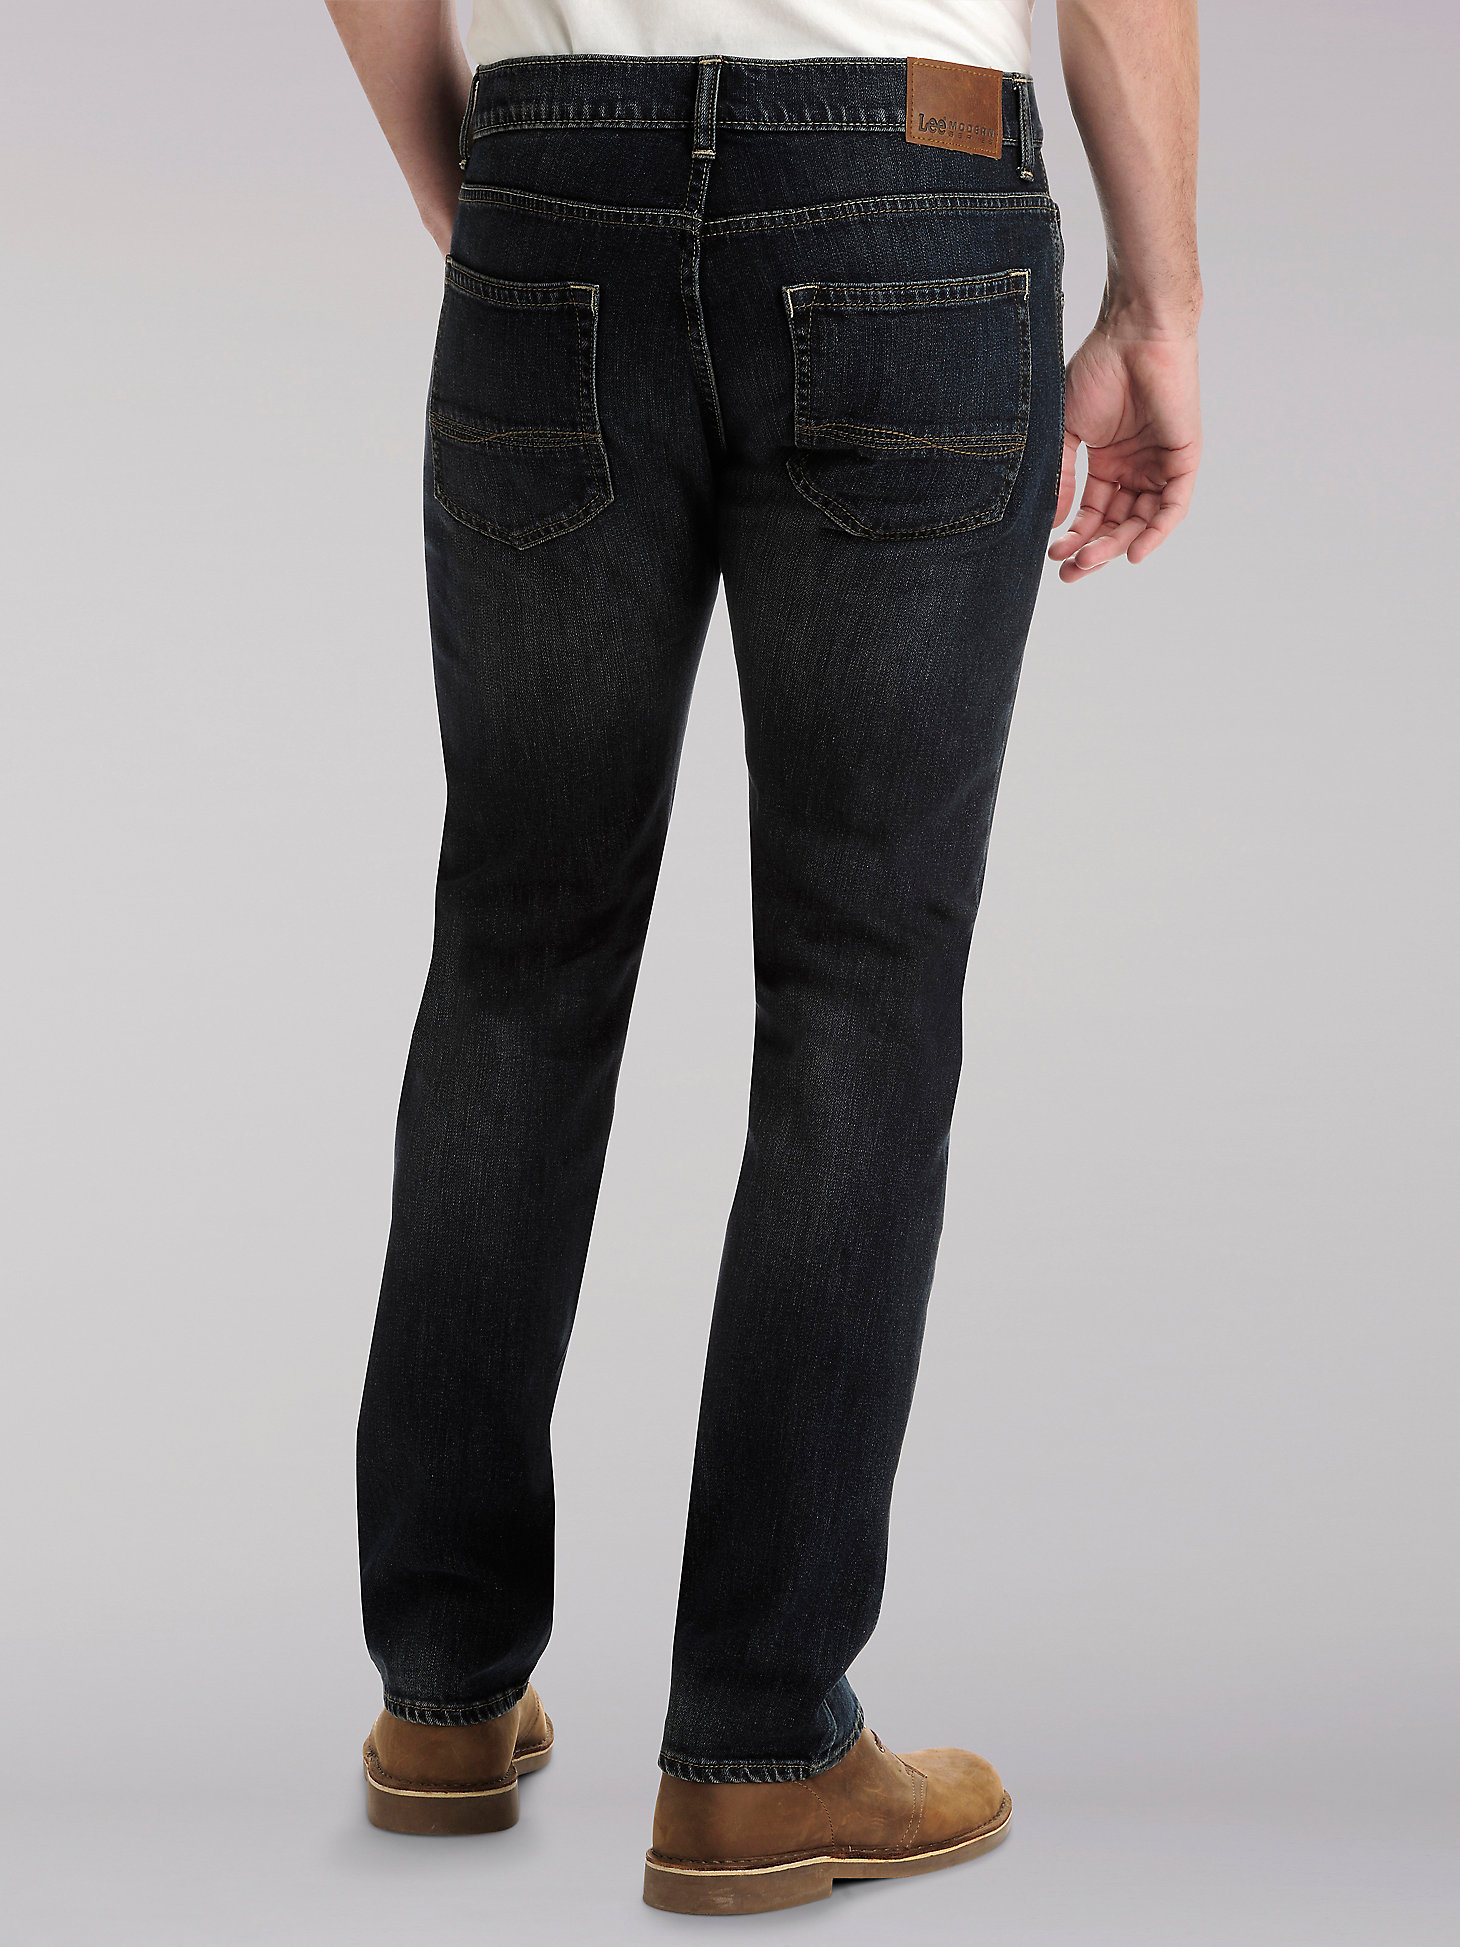 Men’s Modern Series Relaxed Bootcut Jeans in Eagle Eye alternative view 1